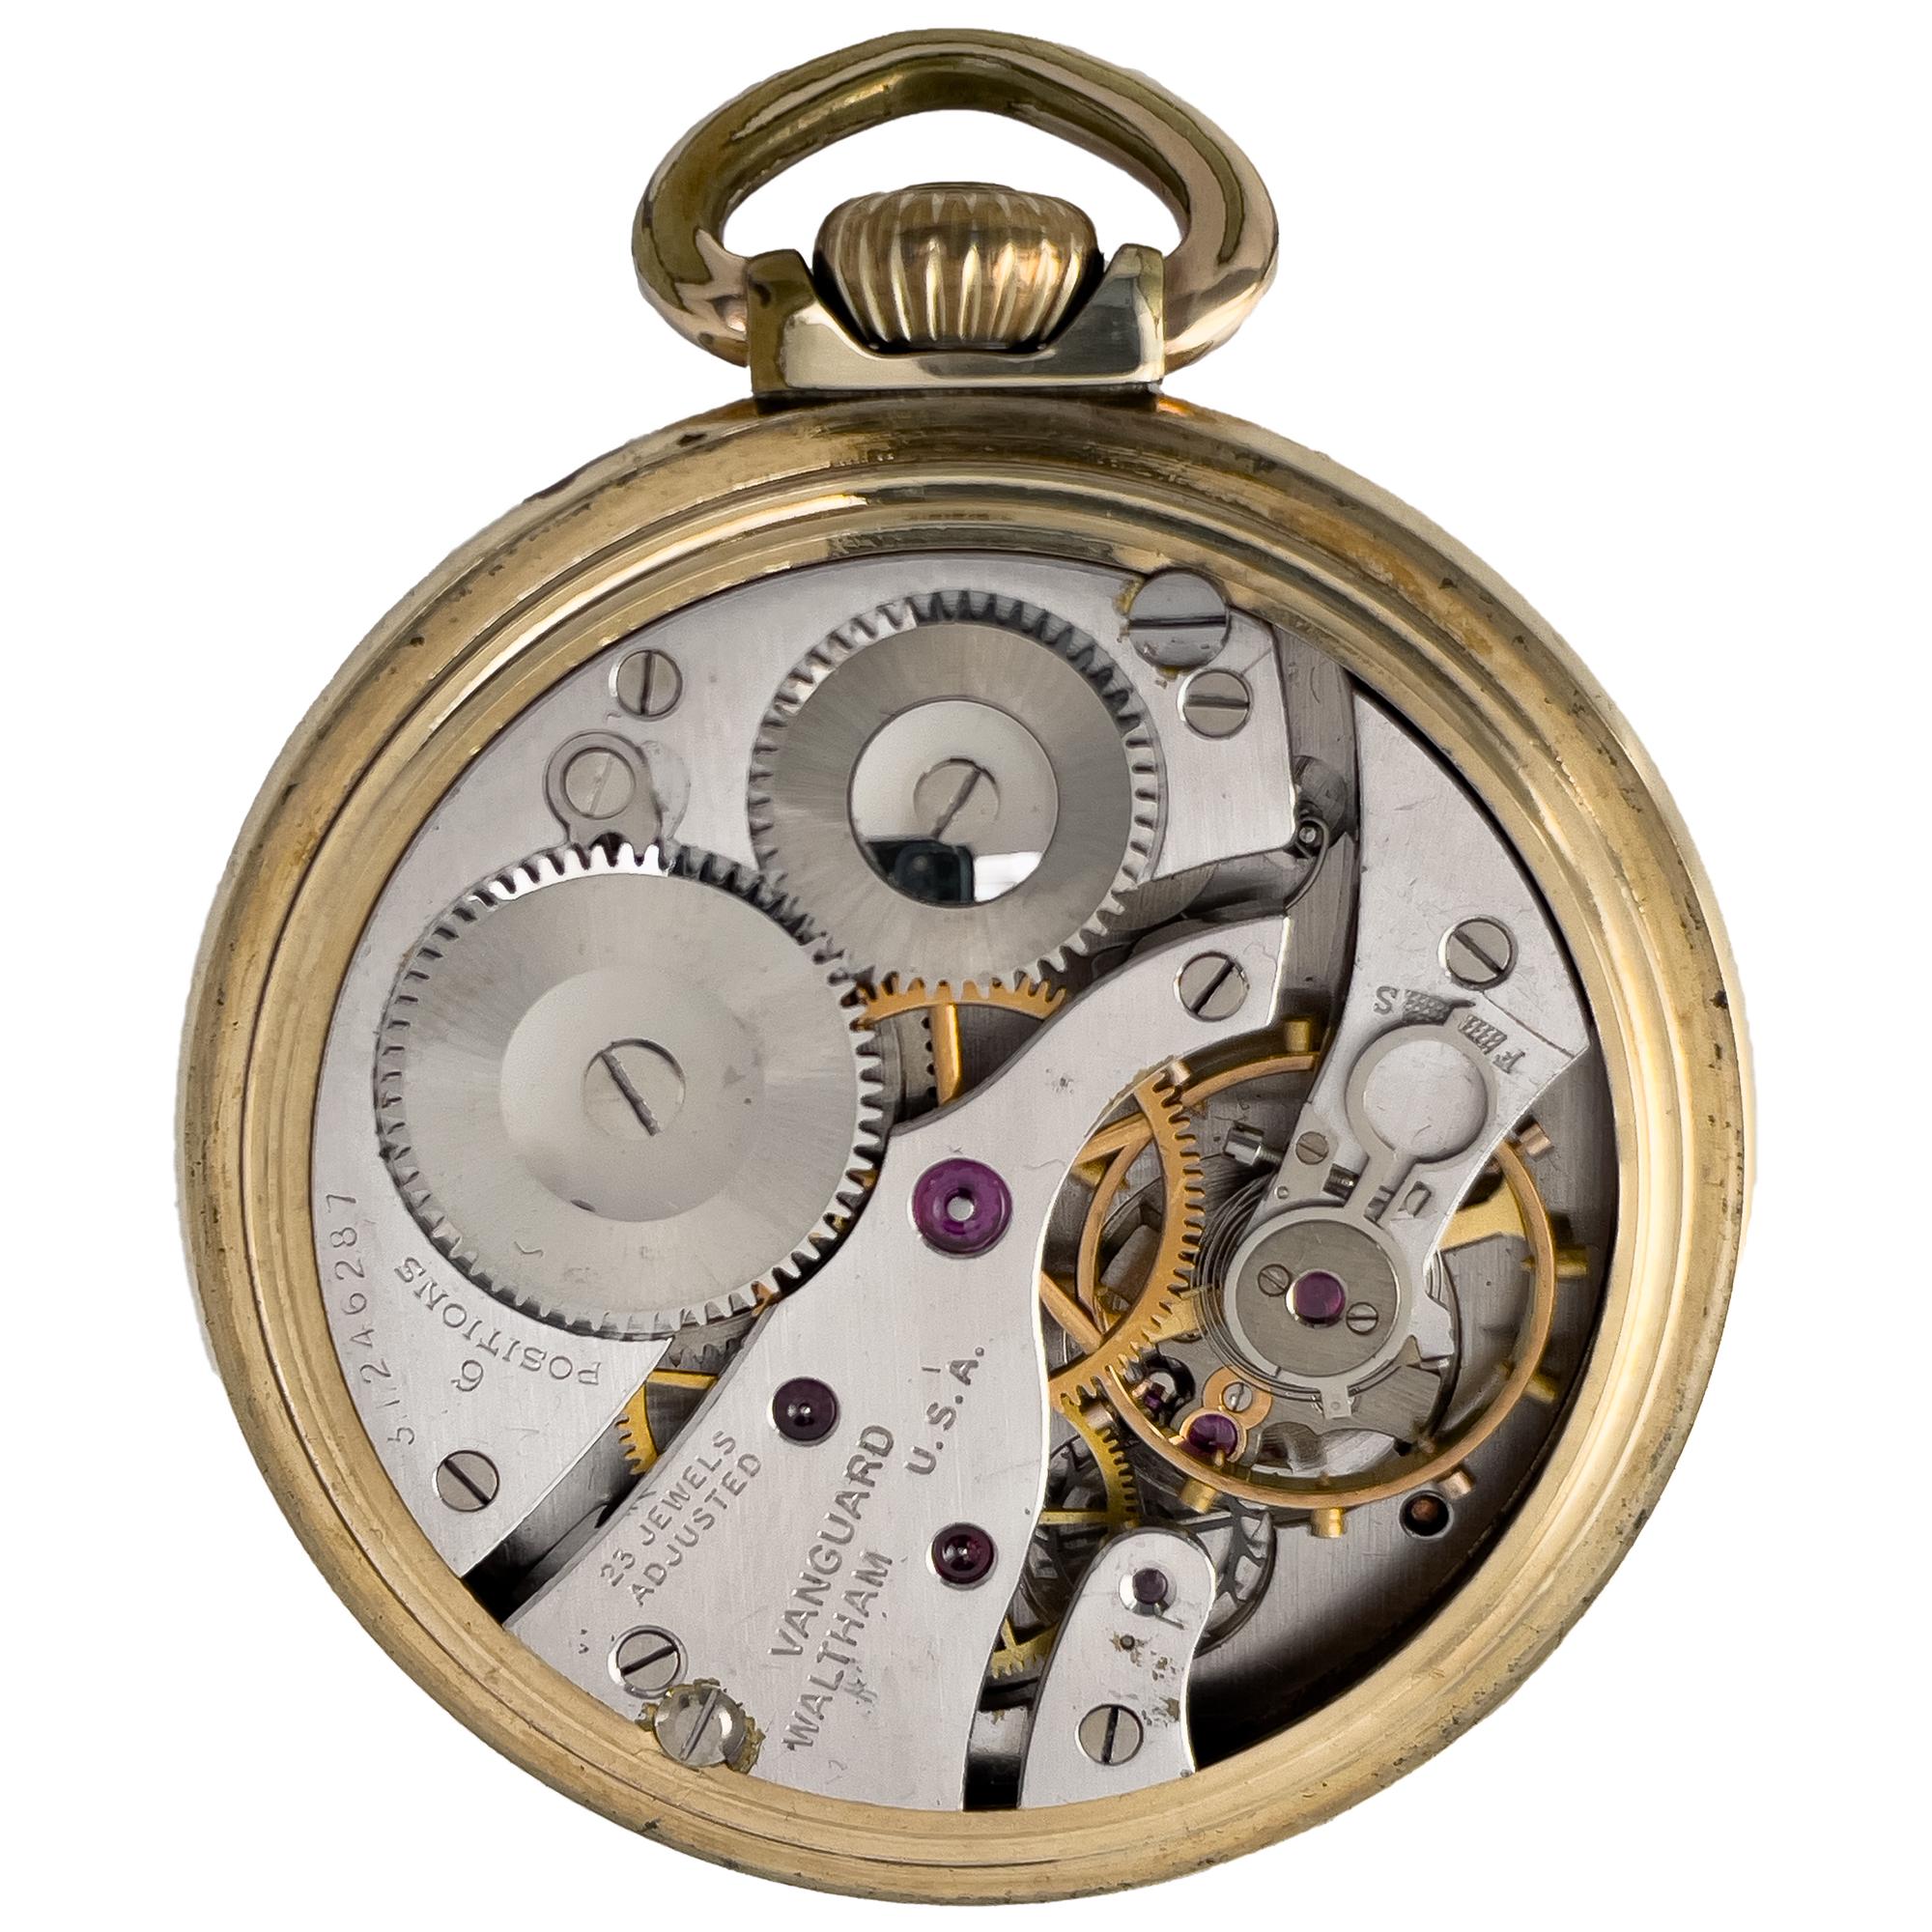 Waltham Vanguard gold filled pocketwatch. Manual wind 23 jewel movement, adjusted in 6 positions. 16 size/50 mm case size. Case Signed 